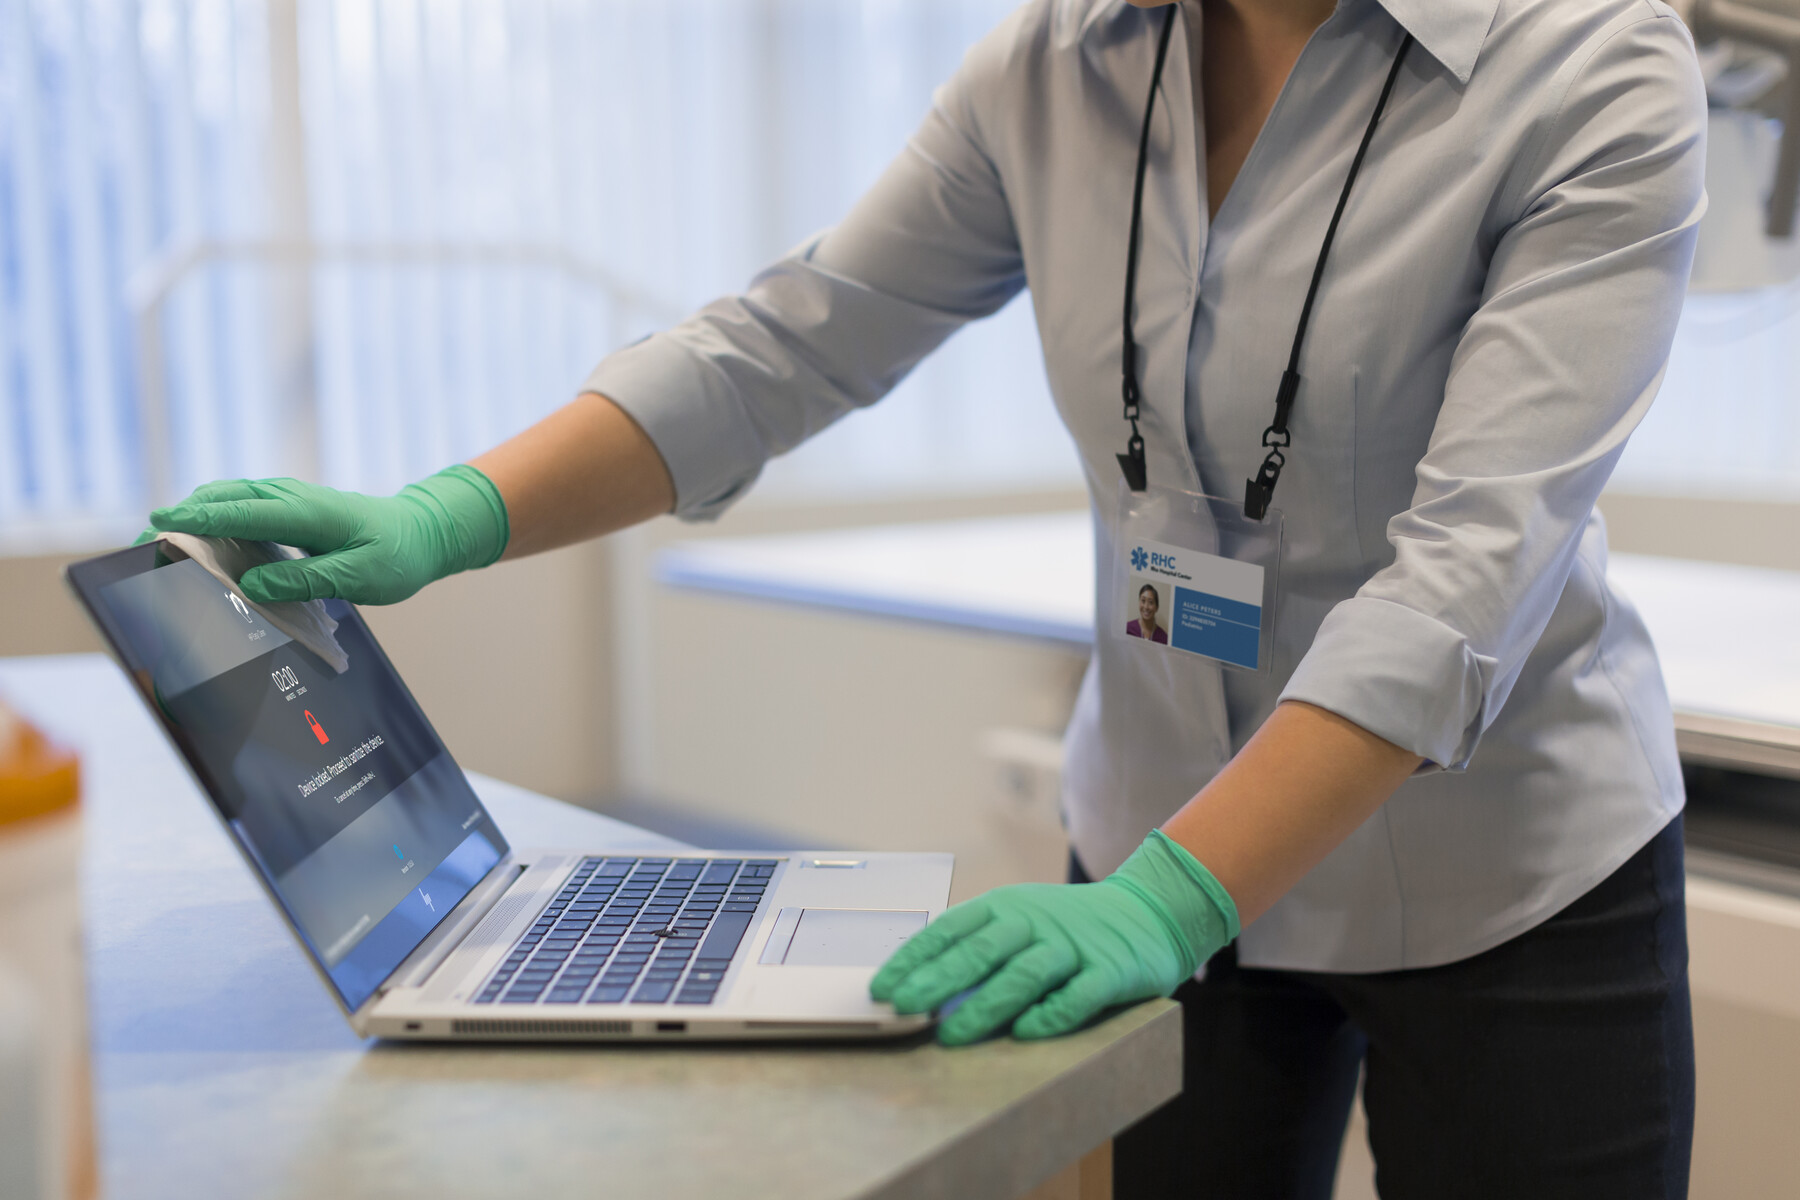 HP wants to help doctors with the EliteBook 840 G6